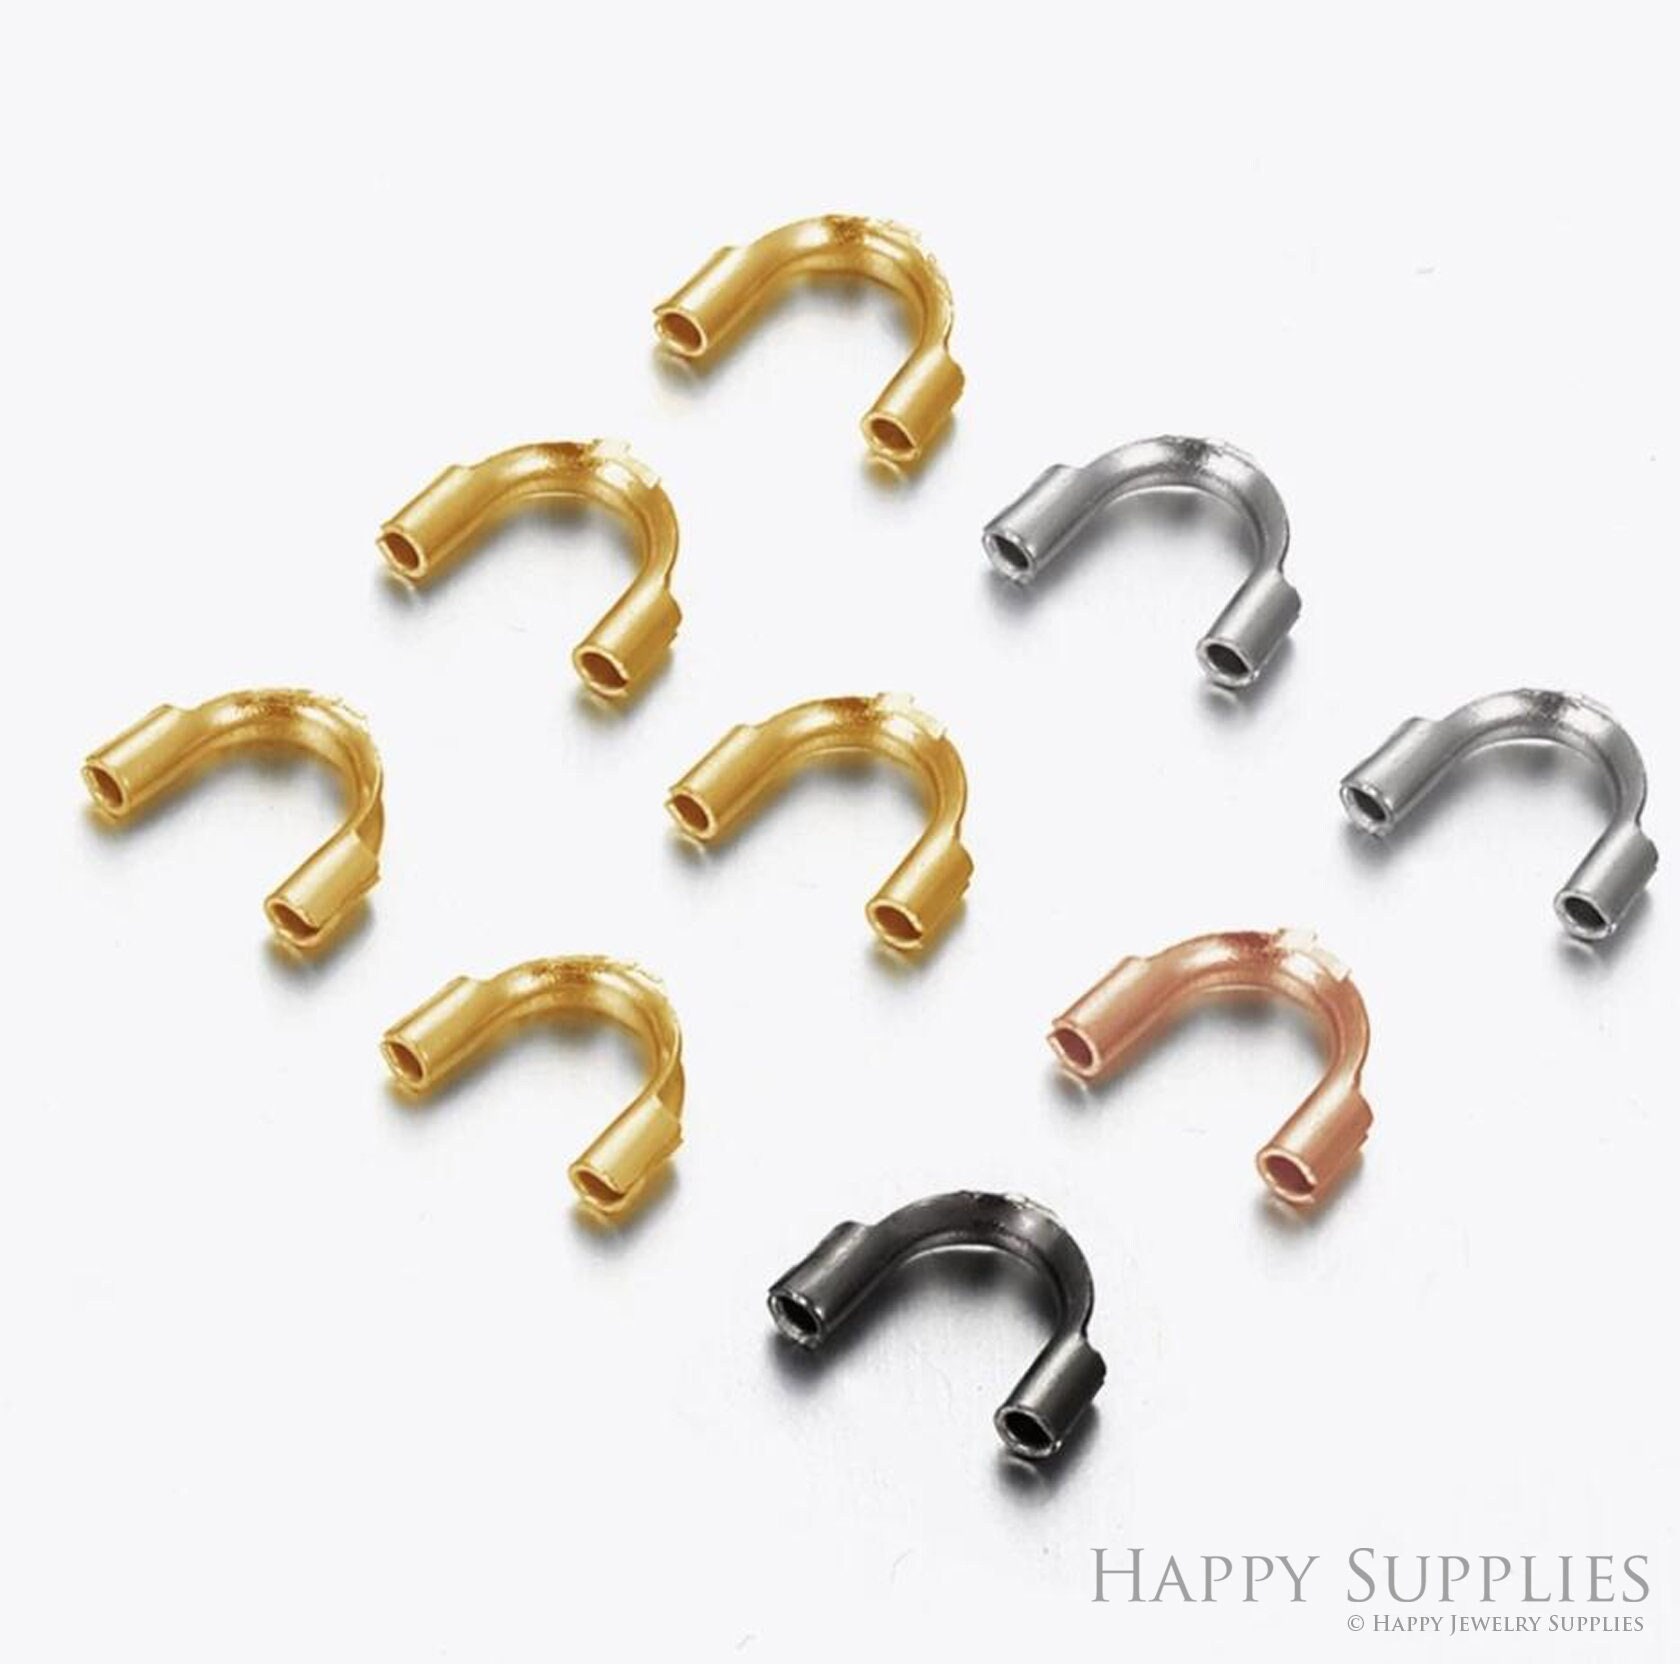 100pcs/lot 4x4mm Wire Protectors Wire Guard Guardian Protectors loops U  Shape Accessories Clasps Connector For Jewelry Making